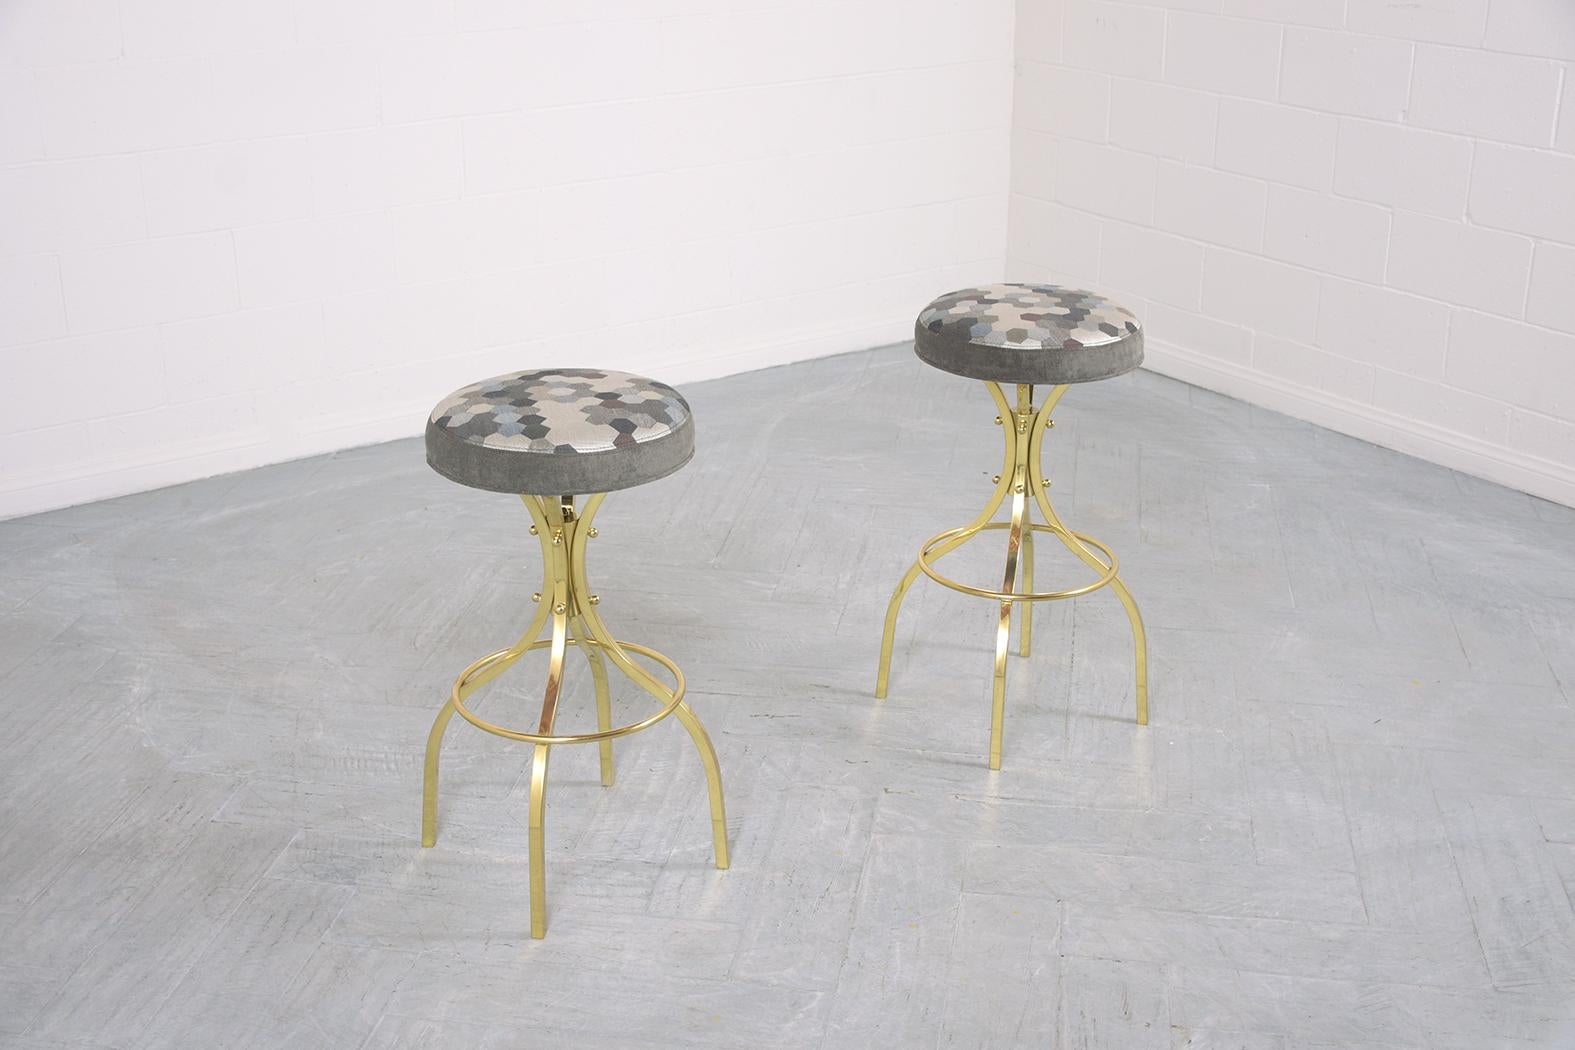 Polished Restored Mid-Century Brass Swivel Bar Stools with Patterned Fabric Seats For Sale